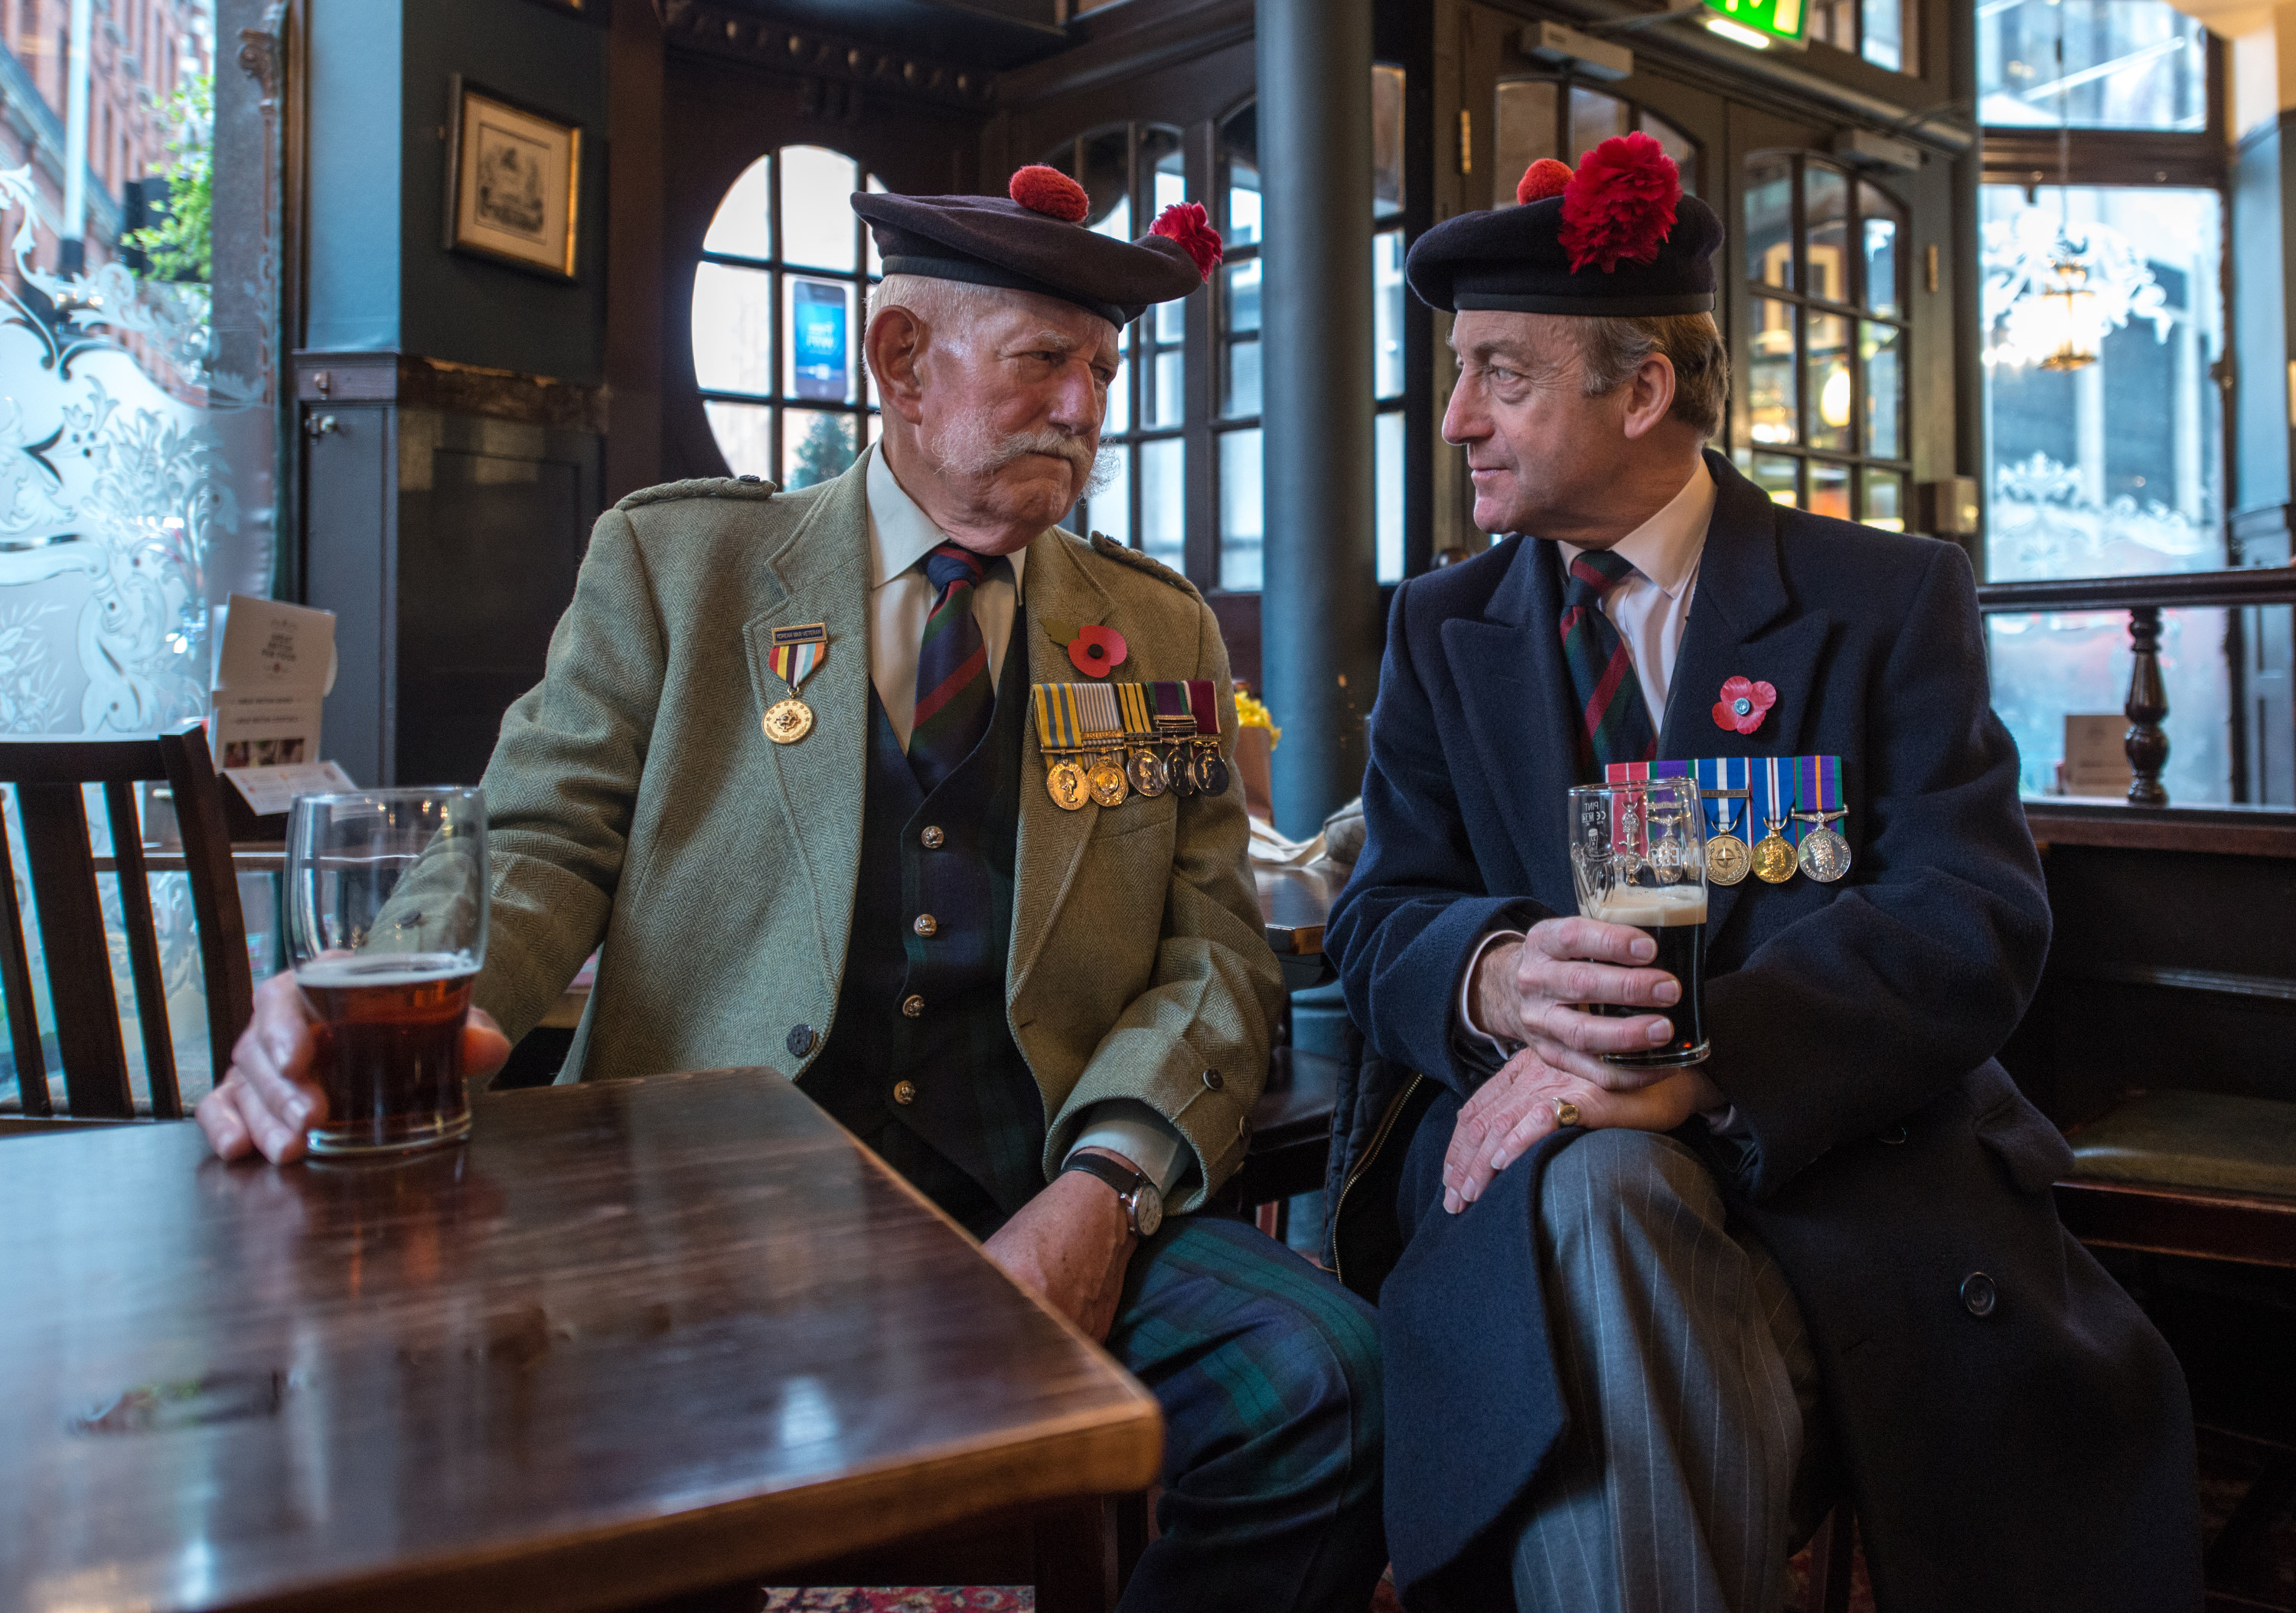 Veterans Joe Hubble and Tim Cole from the Black Watch Association catch up for a swift pint.